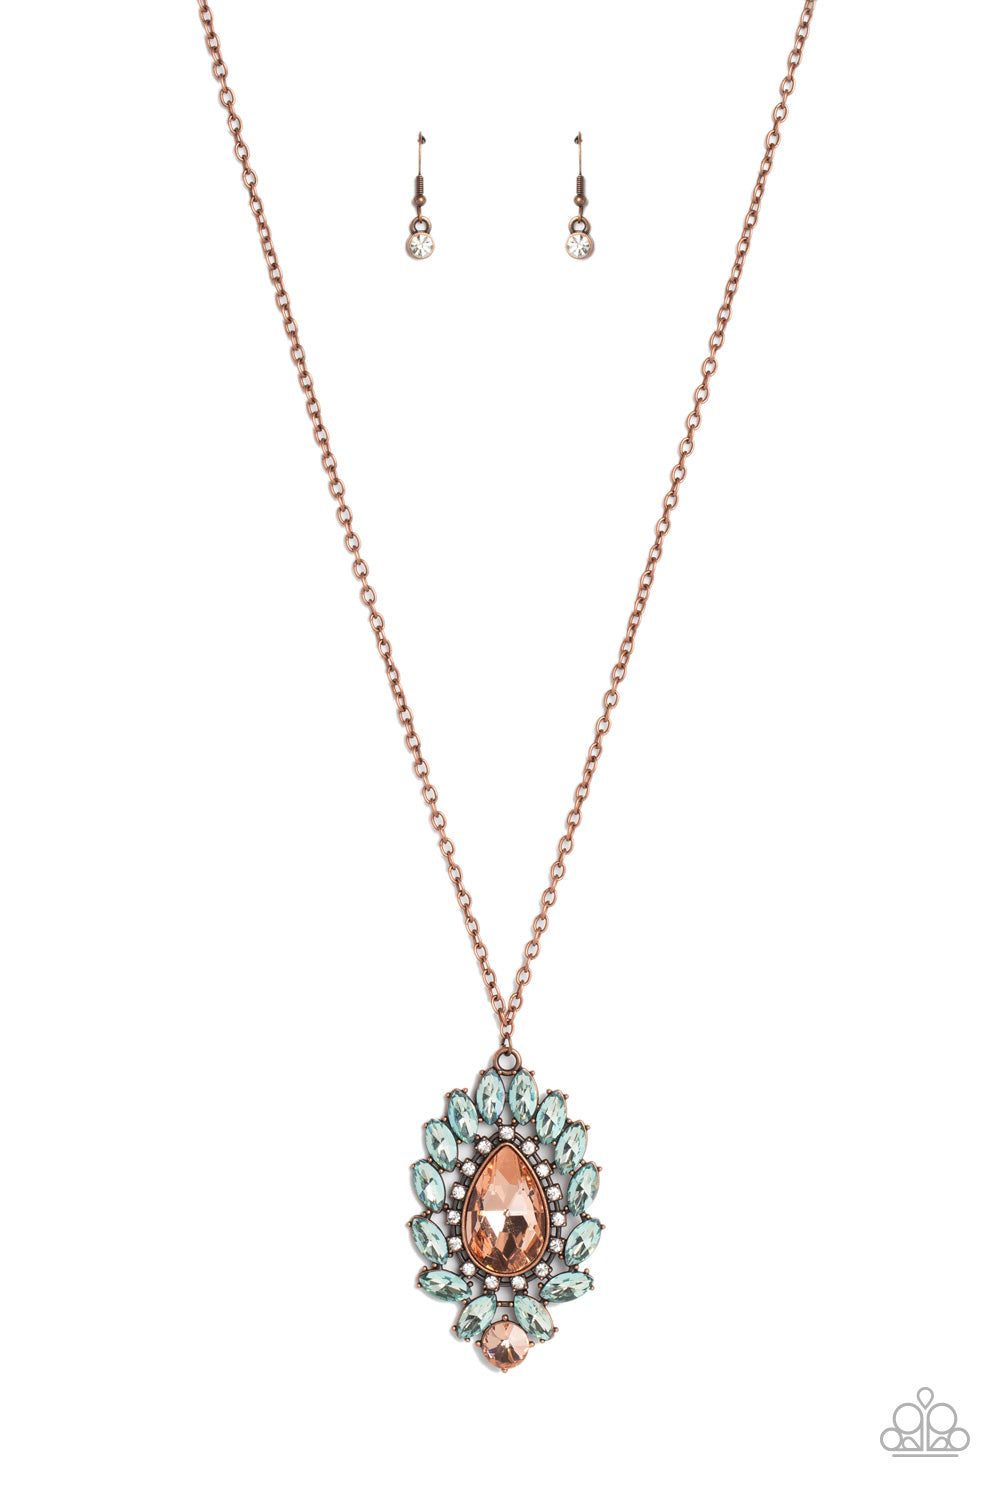 Over the TEARDROP - Copper Necklace - Paparazzi Accessories - Alies Bling Bar